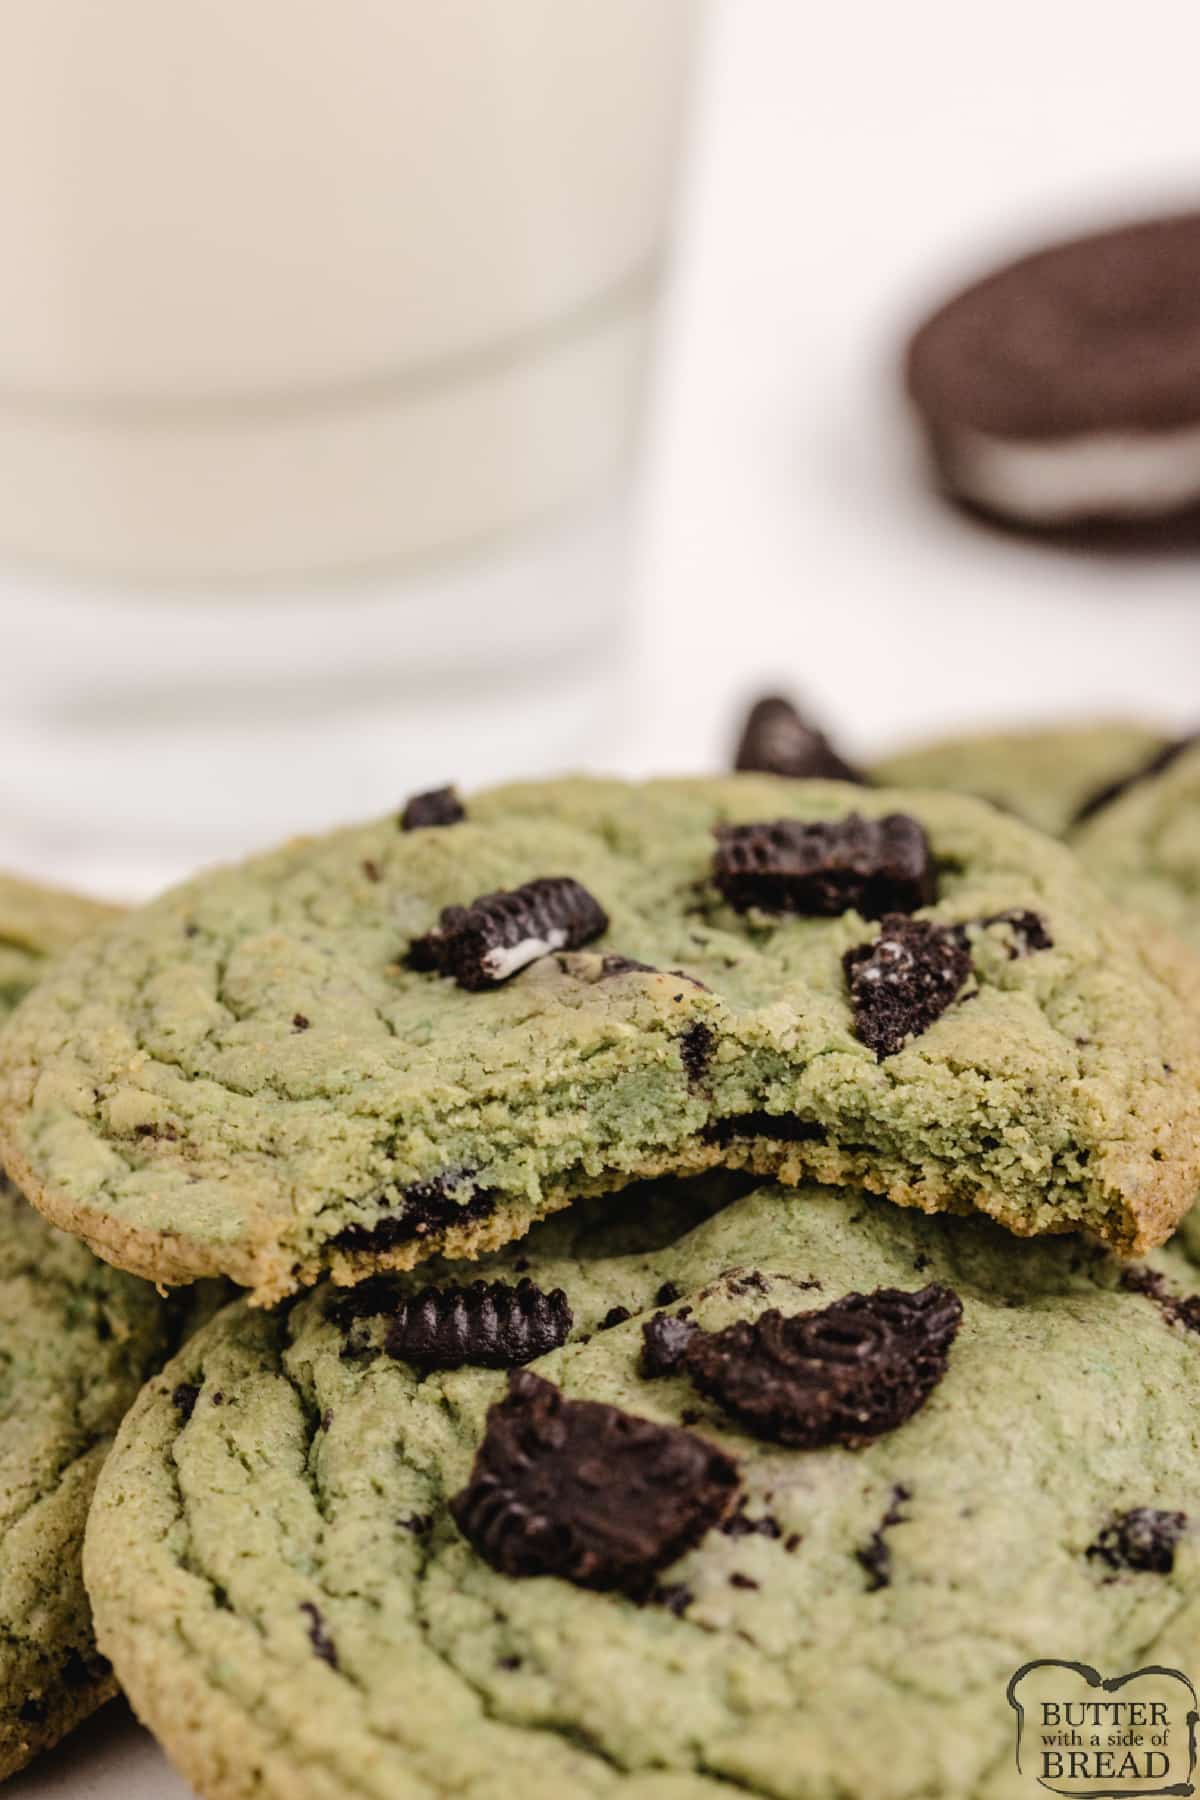 Mint flavored cookies with crushed Oreos